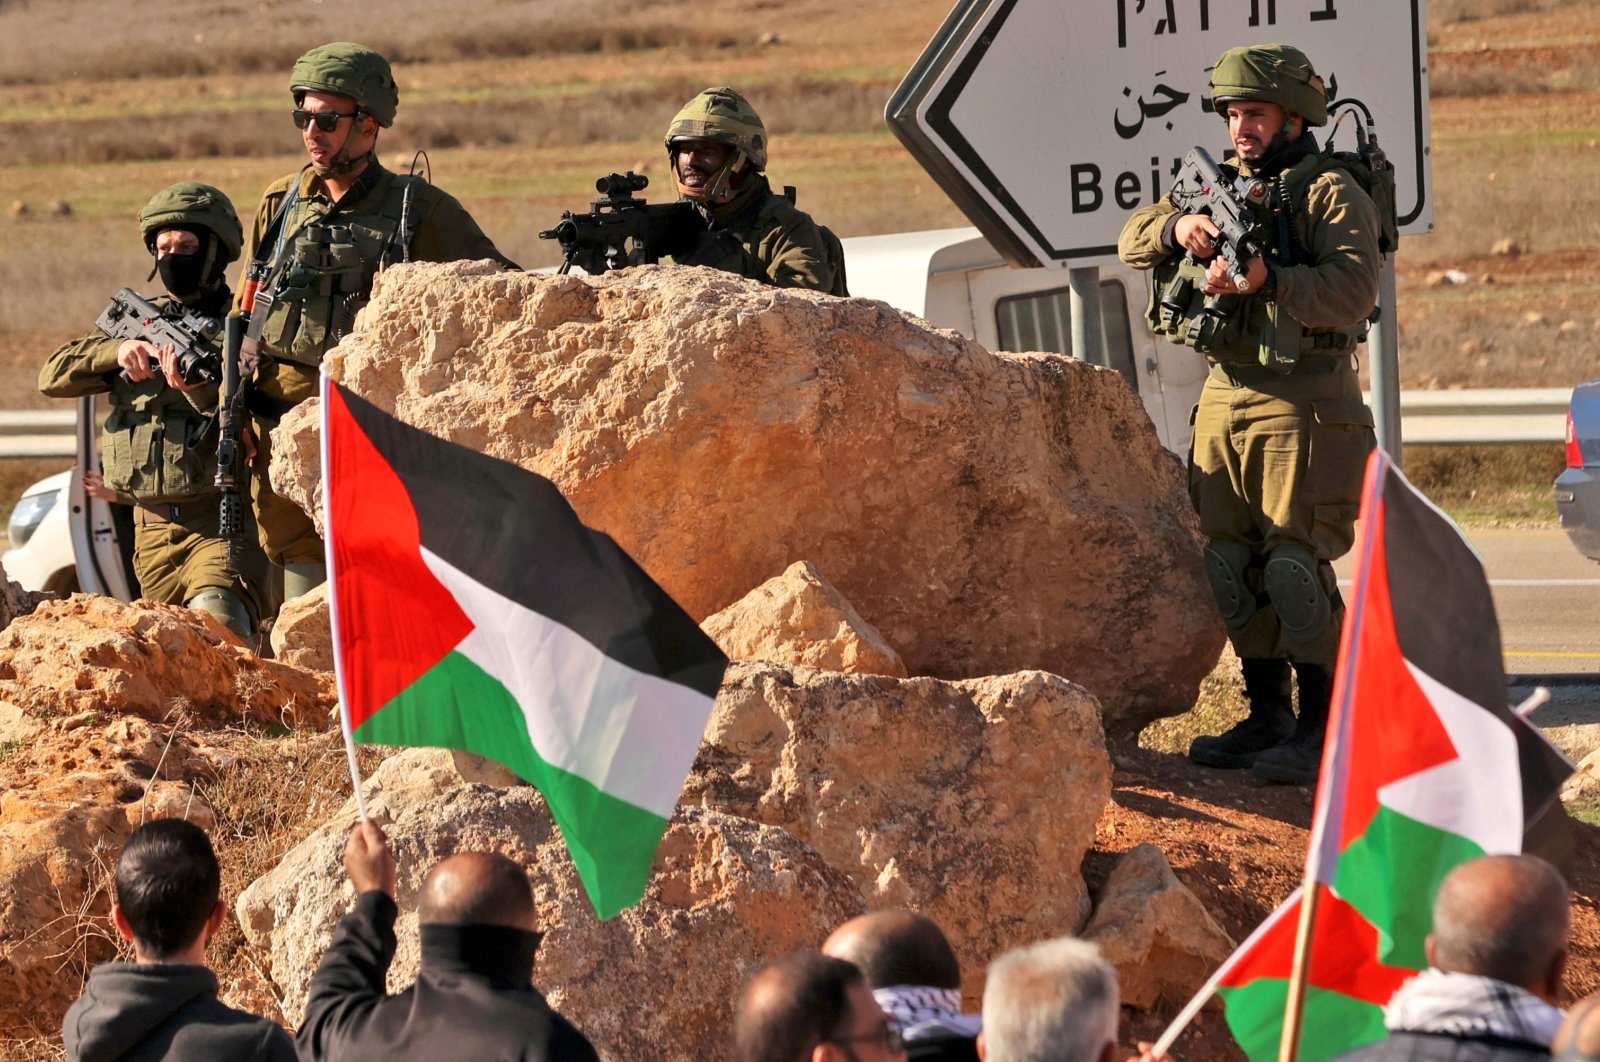 Israeli security forces take position as Palestinians wave national flags during a protest in Beit Dajan, east of the occupied West Bank city of Nablus, against the establishment of Israeli outposts, on Dec. 2, 2022. (AFP Photo)